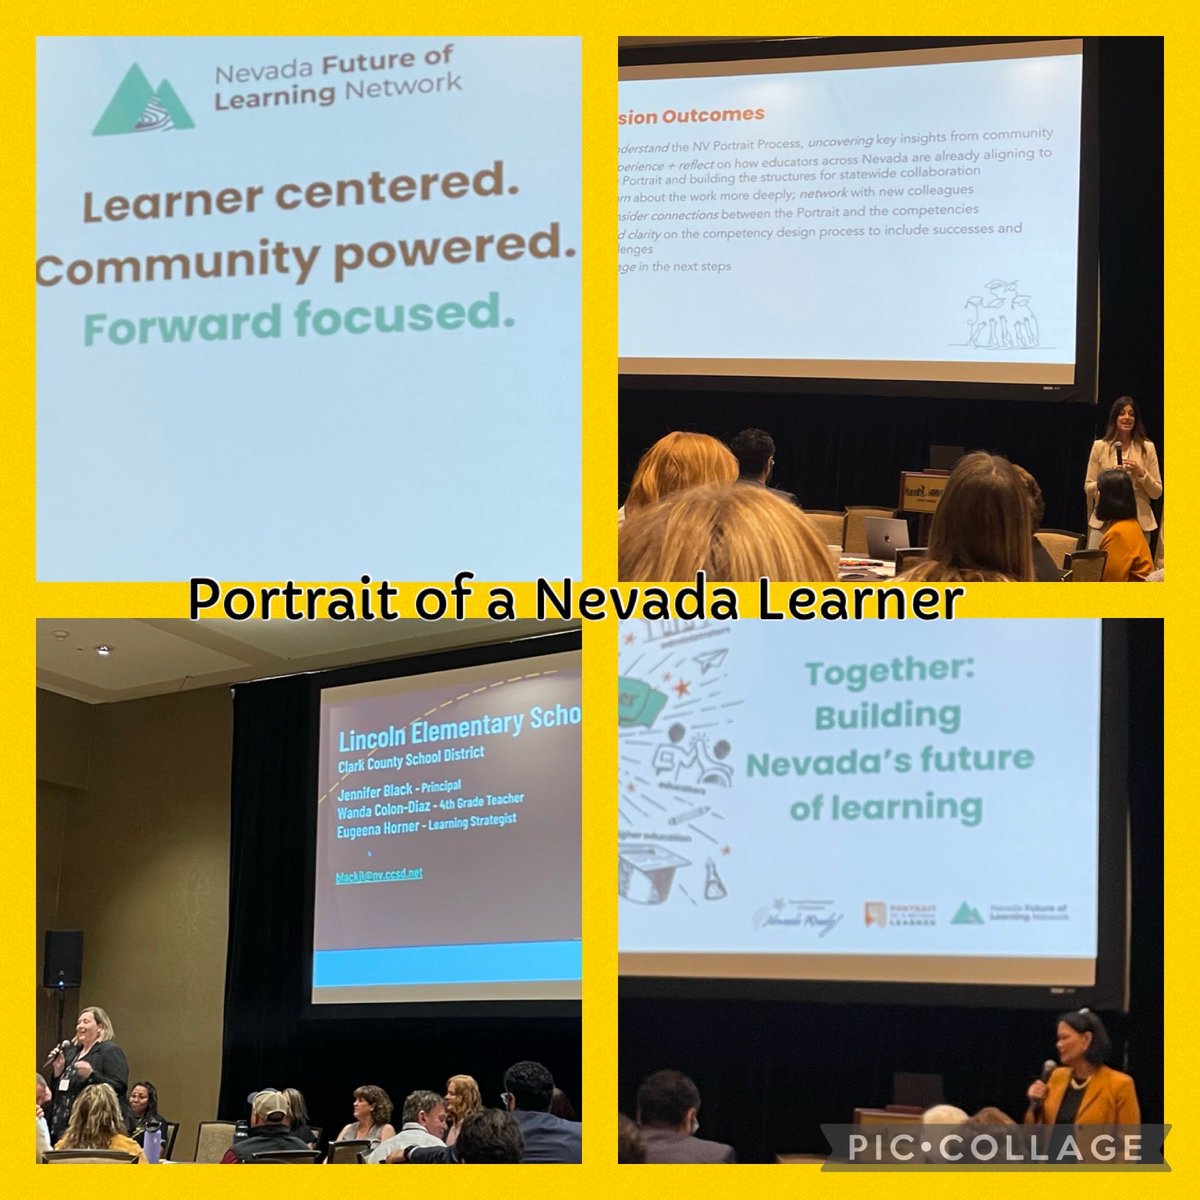 All together today showcasing our pilot projects that center around the Portrait of a Nevada Learner. Top Gun educators and leaders are in this room!  ⁦@jeaninepcollins⁩ ⁦@NevadaReady⁩ ⁦@pammoran⁩ ⁦@LincolnES1⁩ ⁦@EugeenaH⁩ ⁦@DrColonDiaz1⁩